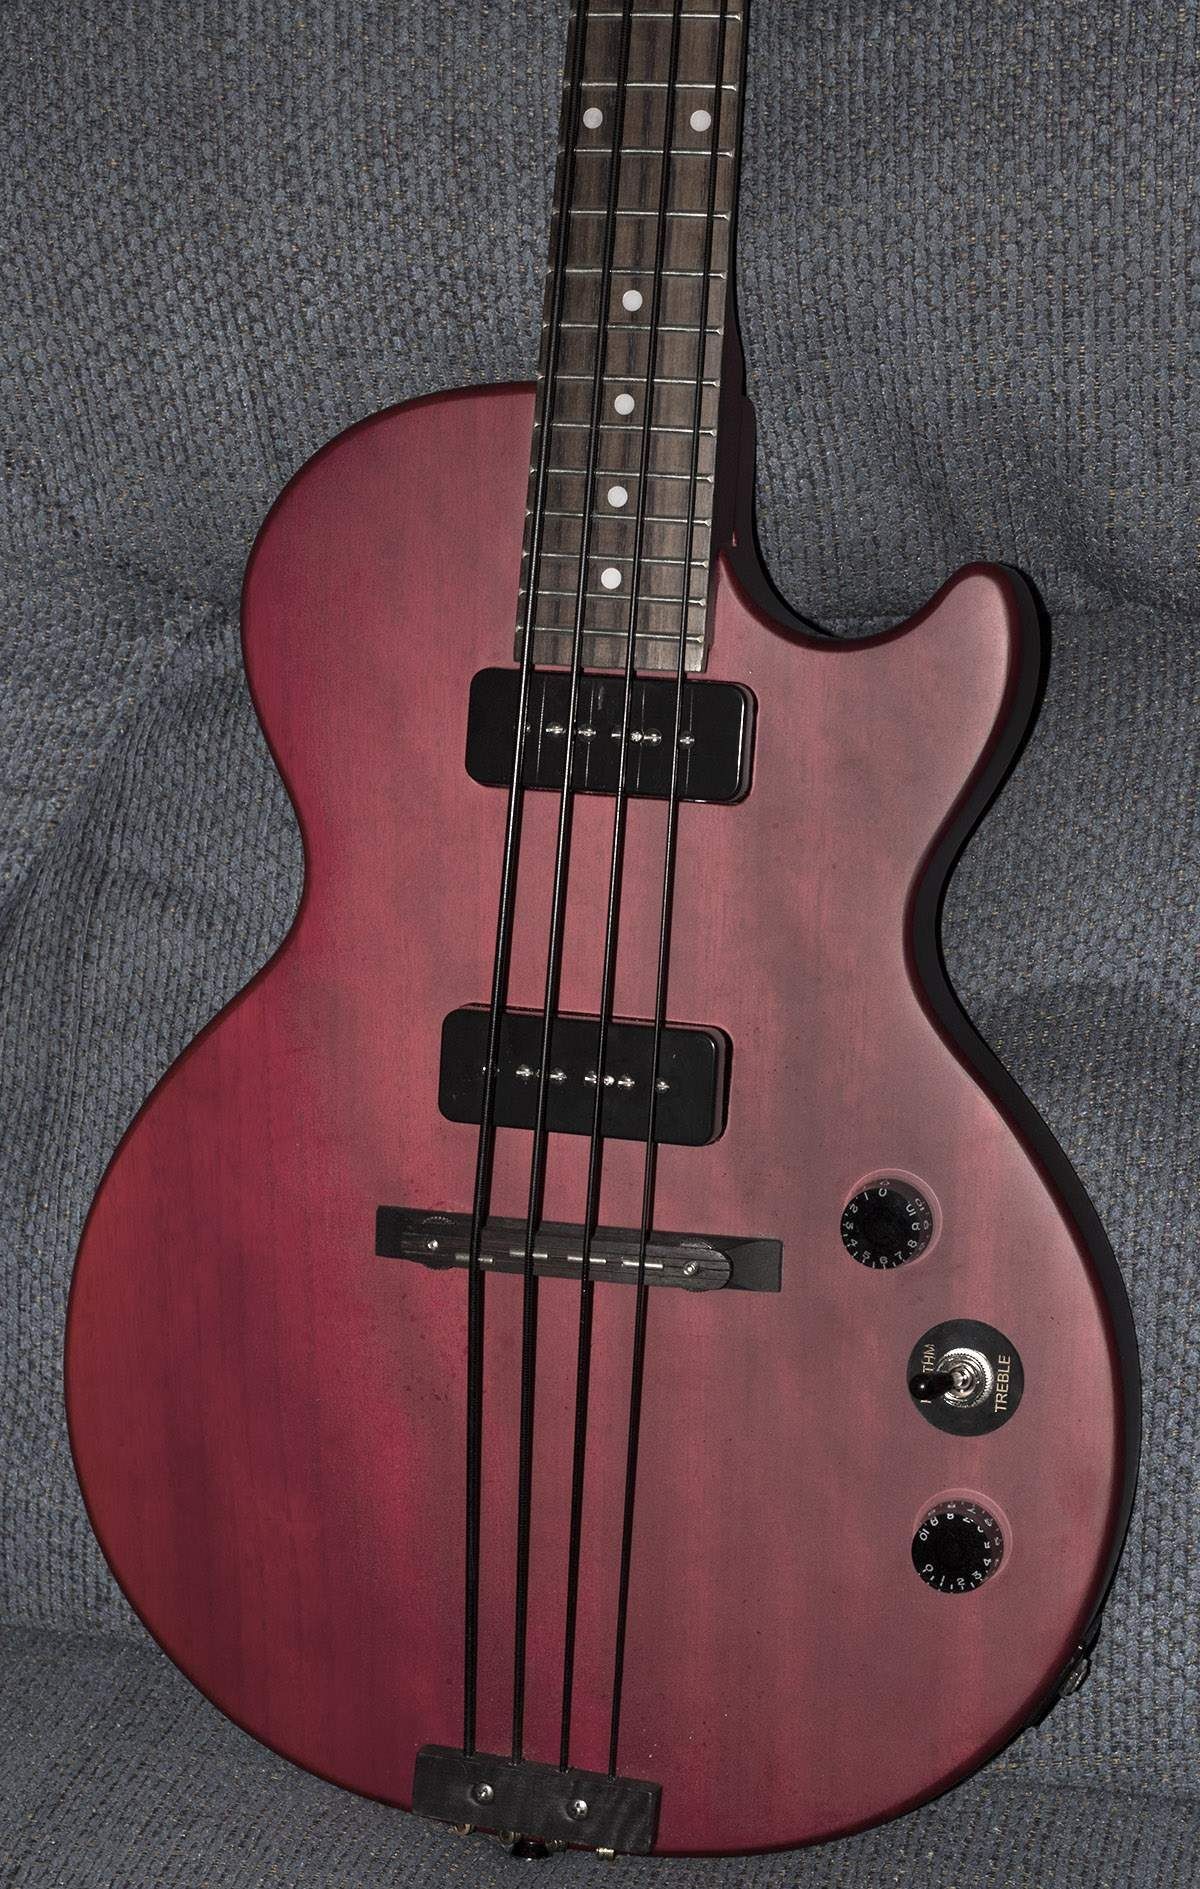 Over the past year I ve pleted several guitar to super short scale bass conversions similar to the one being started by kohanmike but I used Epiphone Dot